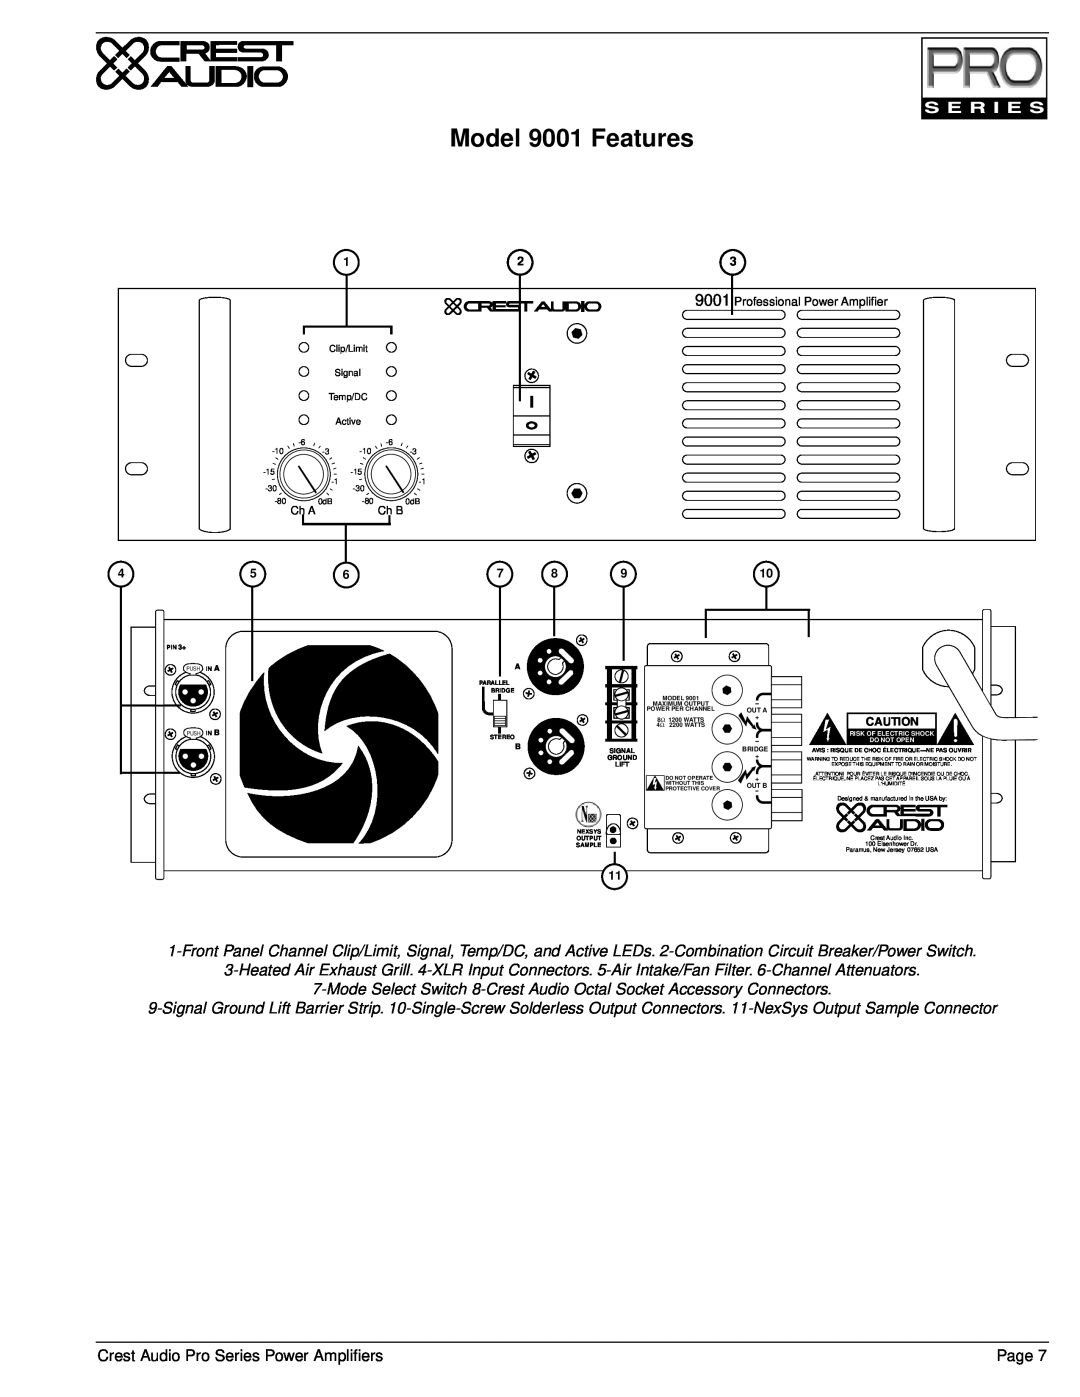 Crest Audio Stereo Amplifier owner manual Model 9001 Features, Professional Power Amplifier 